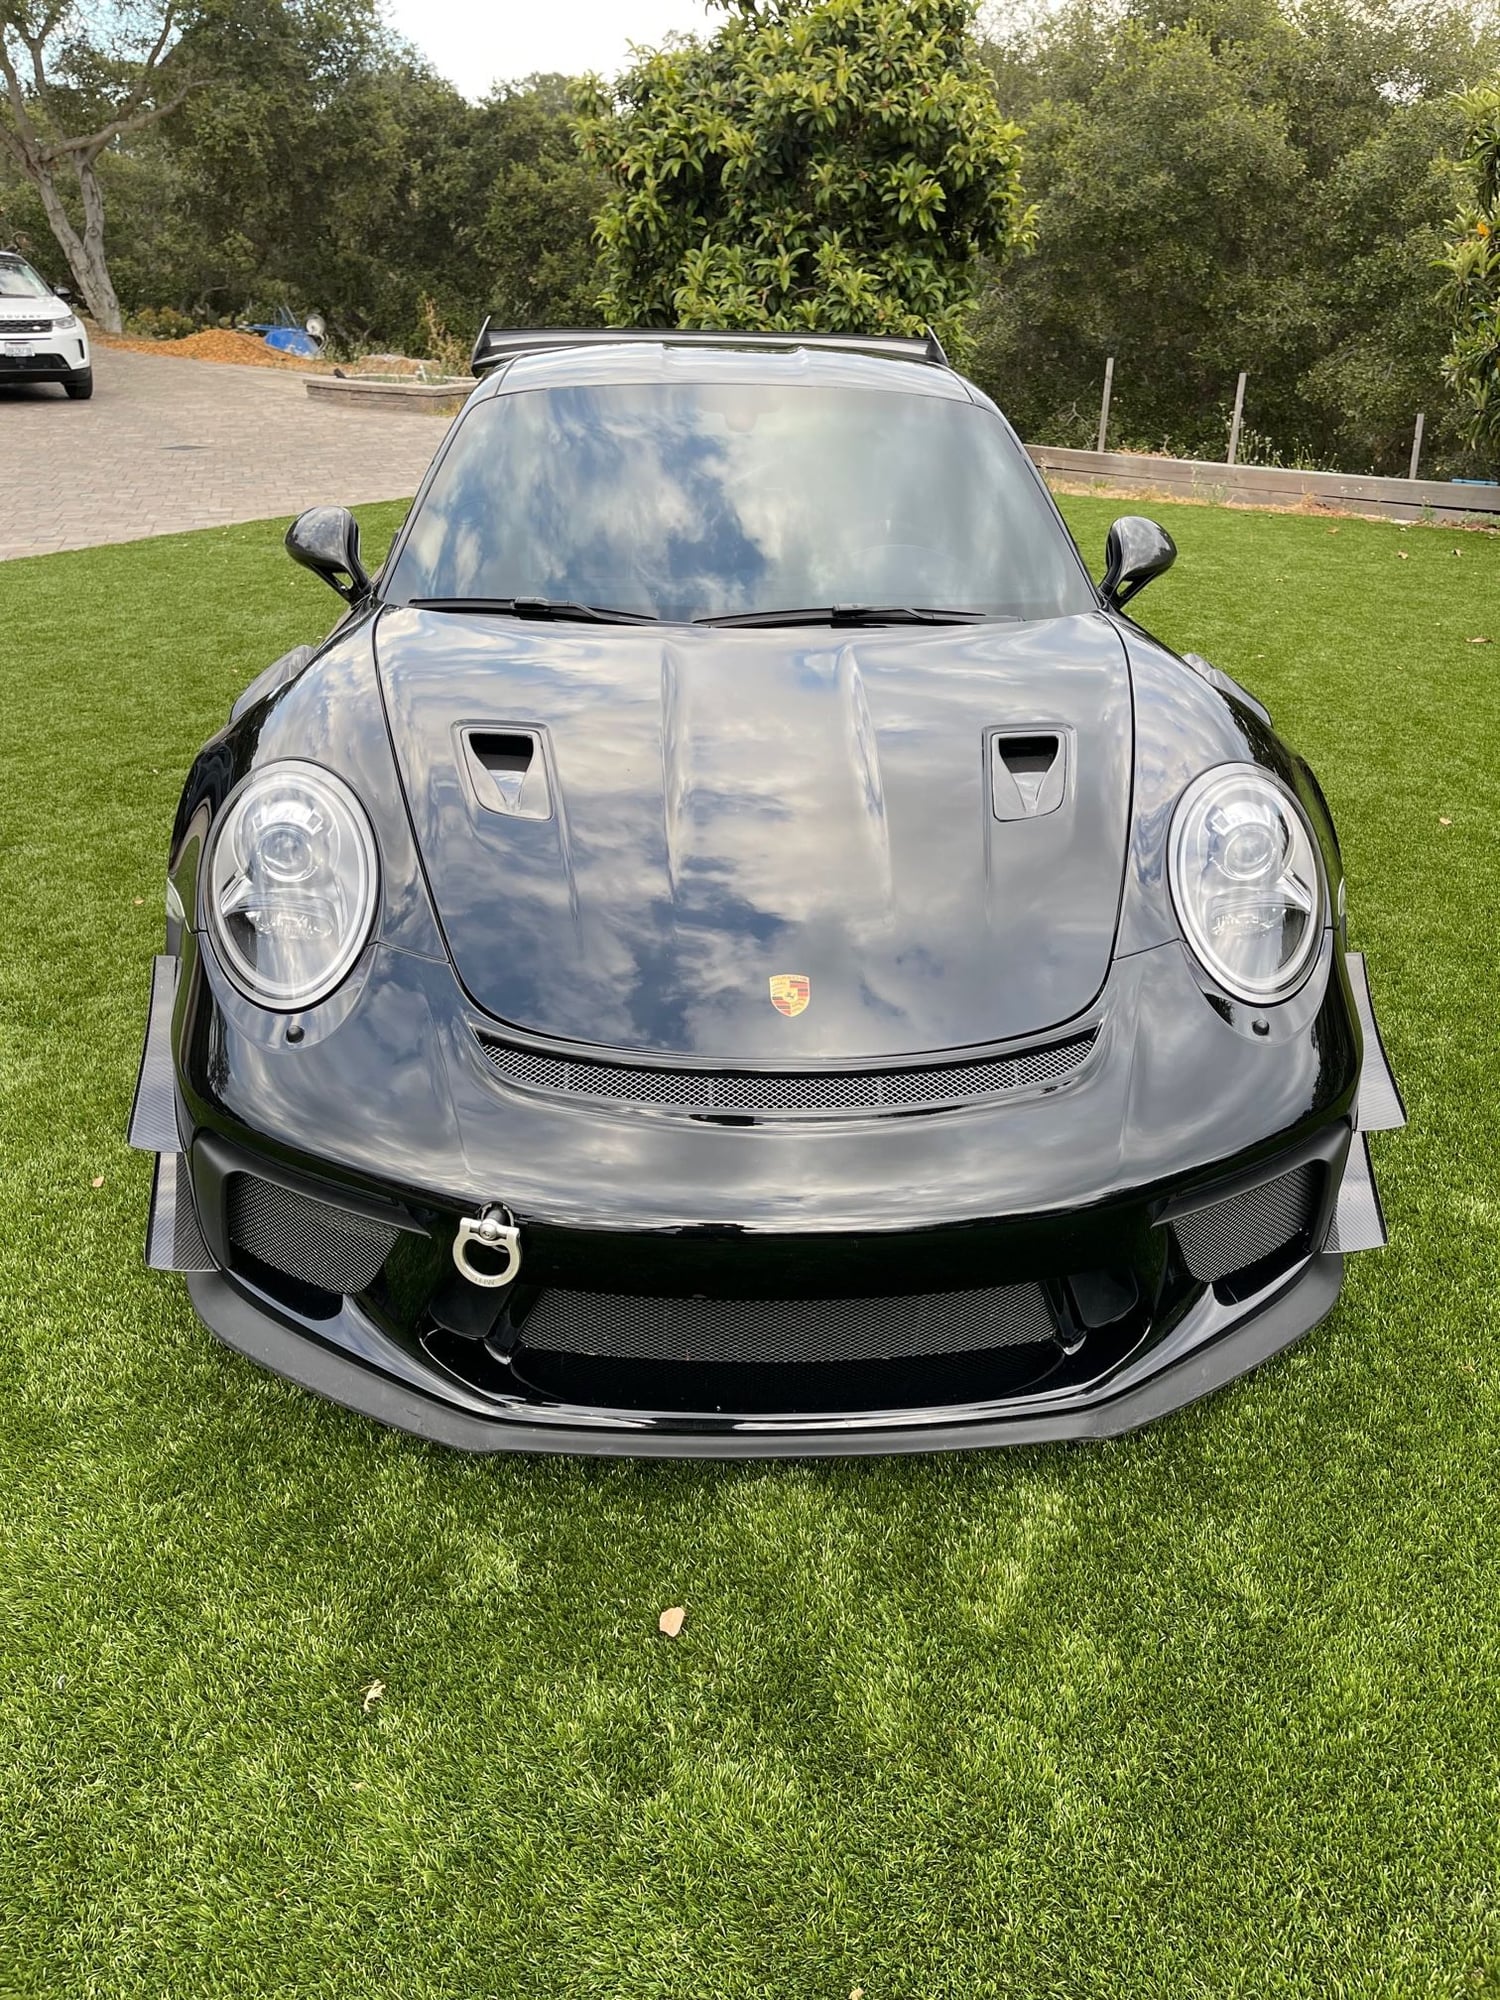 2019 Porsche GT3 - 2019 GT3RS Weissach package 8,477 miles - Used - VIN WP0AF2A91KS165252 - 8,477 Miles - 2WD - Automatic - Coupe - Black - Santa Cruz, CA 95060, United States